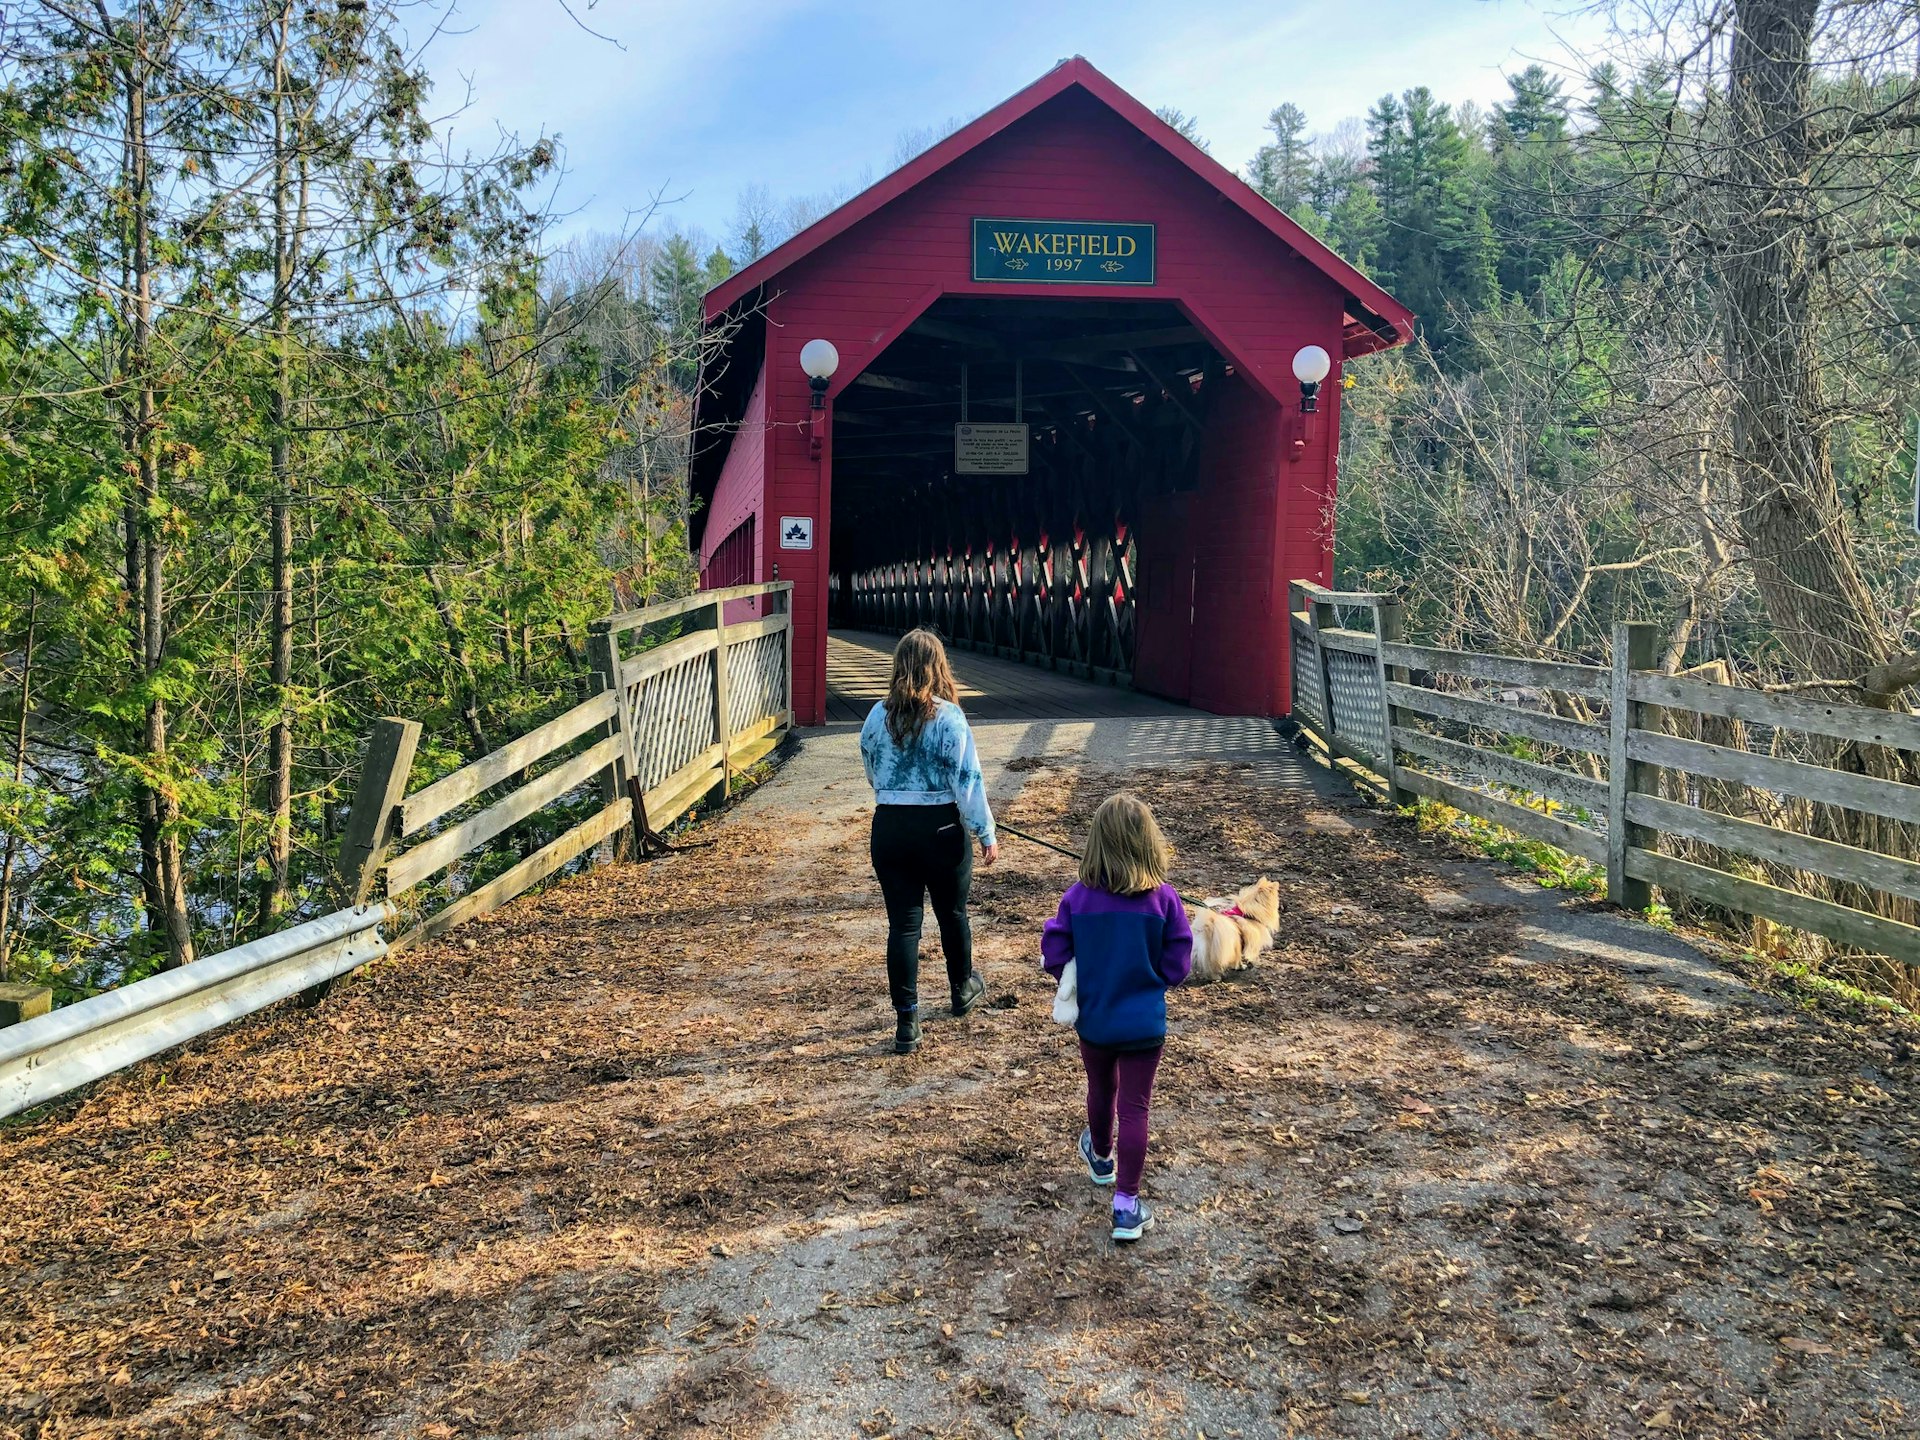 A mother and daughter approach the entrance of a wooden covered bridge painted red